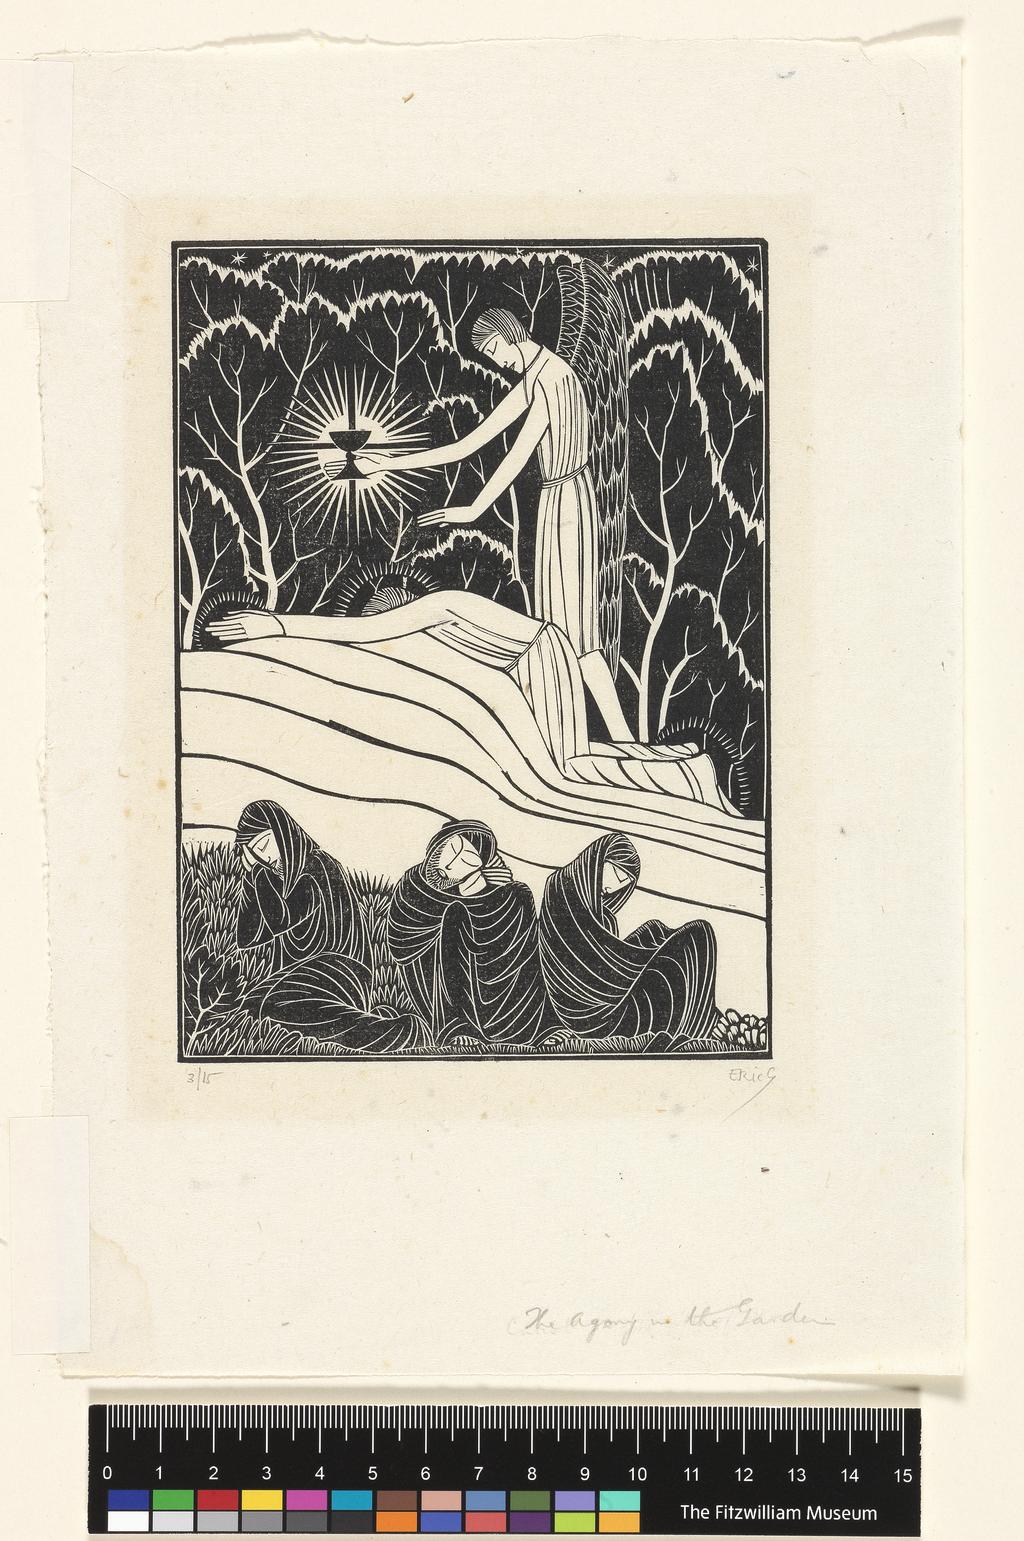 An image of The Agony in the Garden. Passio Domini Nostri Jesu Christi. Gill, Eric, printmaker (British, 1882-1940). Golden Cockerel Press, publisher. Wood engraving, black carbon ink on paper, height, image, 155 mm, width, image, 112 mm; height, sheet, 256 mm, width, sheet, 172 mm, 1926. Production Note(s): 3/15. Proof of an illustration on page 4 to Passio Domini Nostri Jesu Christi, No. 35 of the publications of the Golden Cockerel Press, Waltham St. Lawrence, Berkshire, 1926.